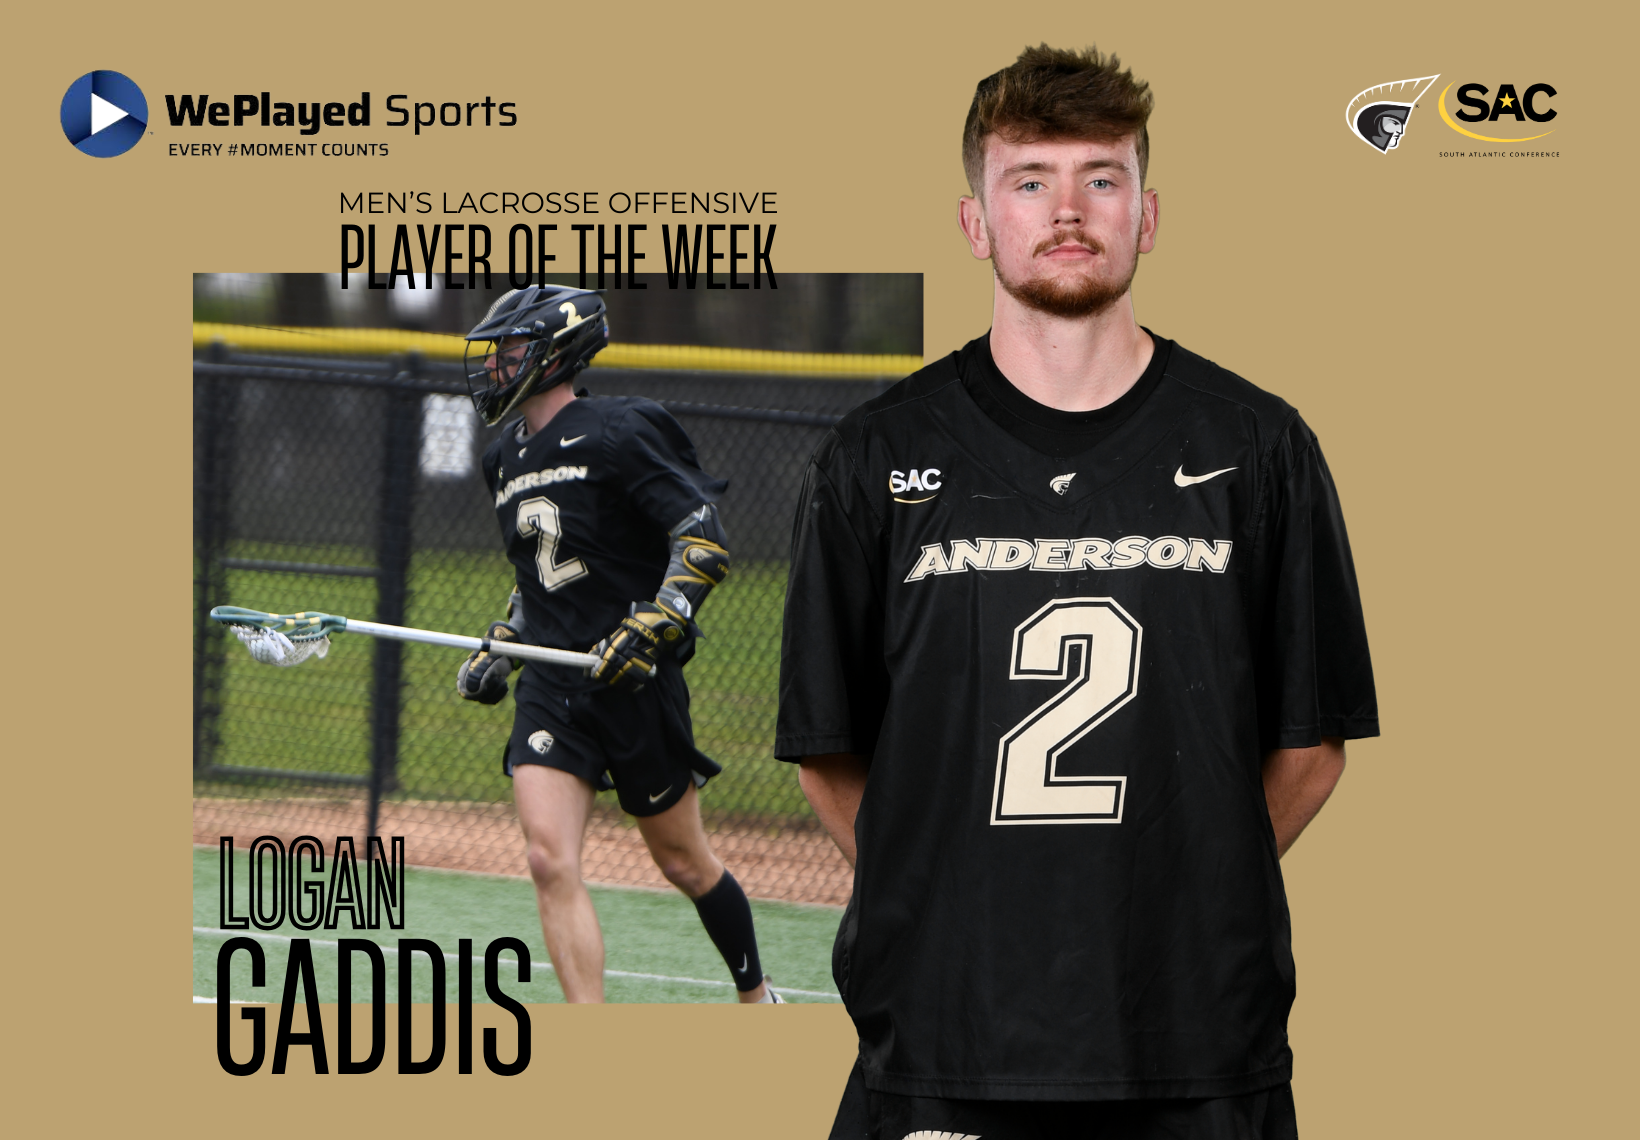 Gaddis Named WePlayed Sports Men's Lacrosse Offensive Player of the Week